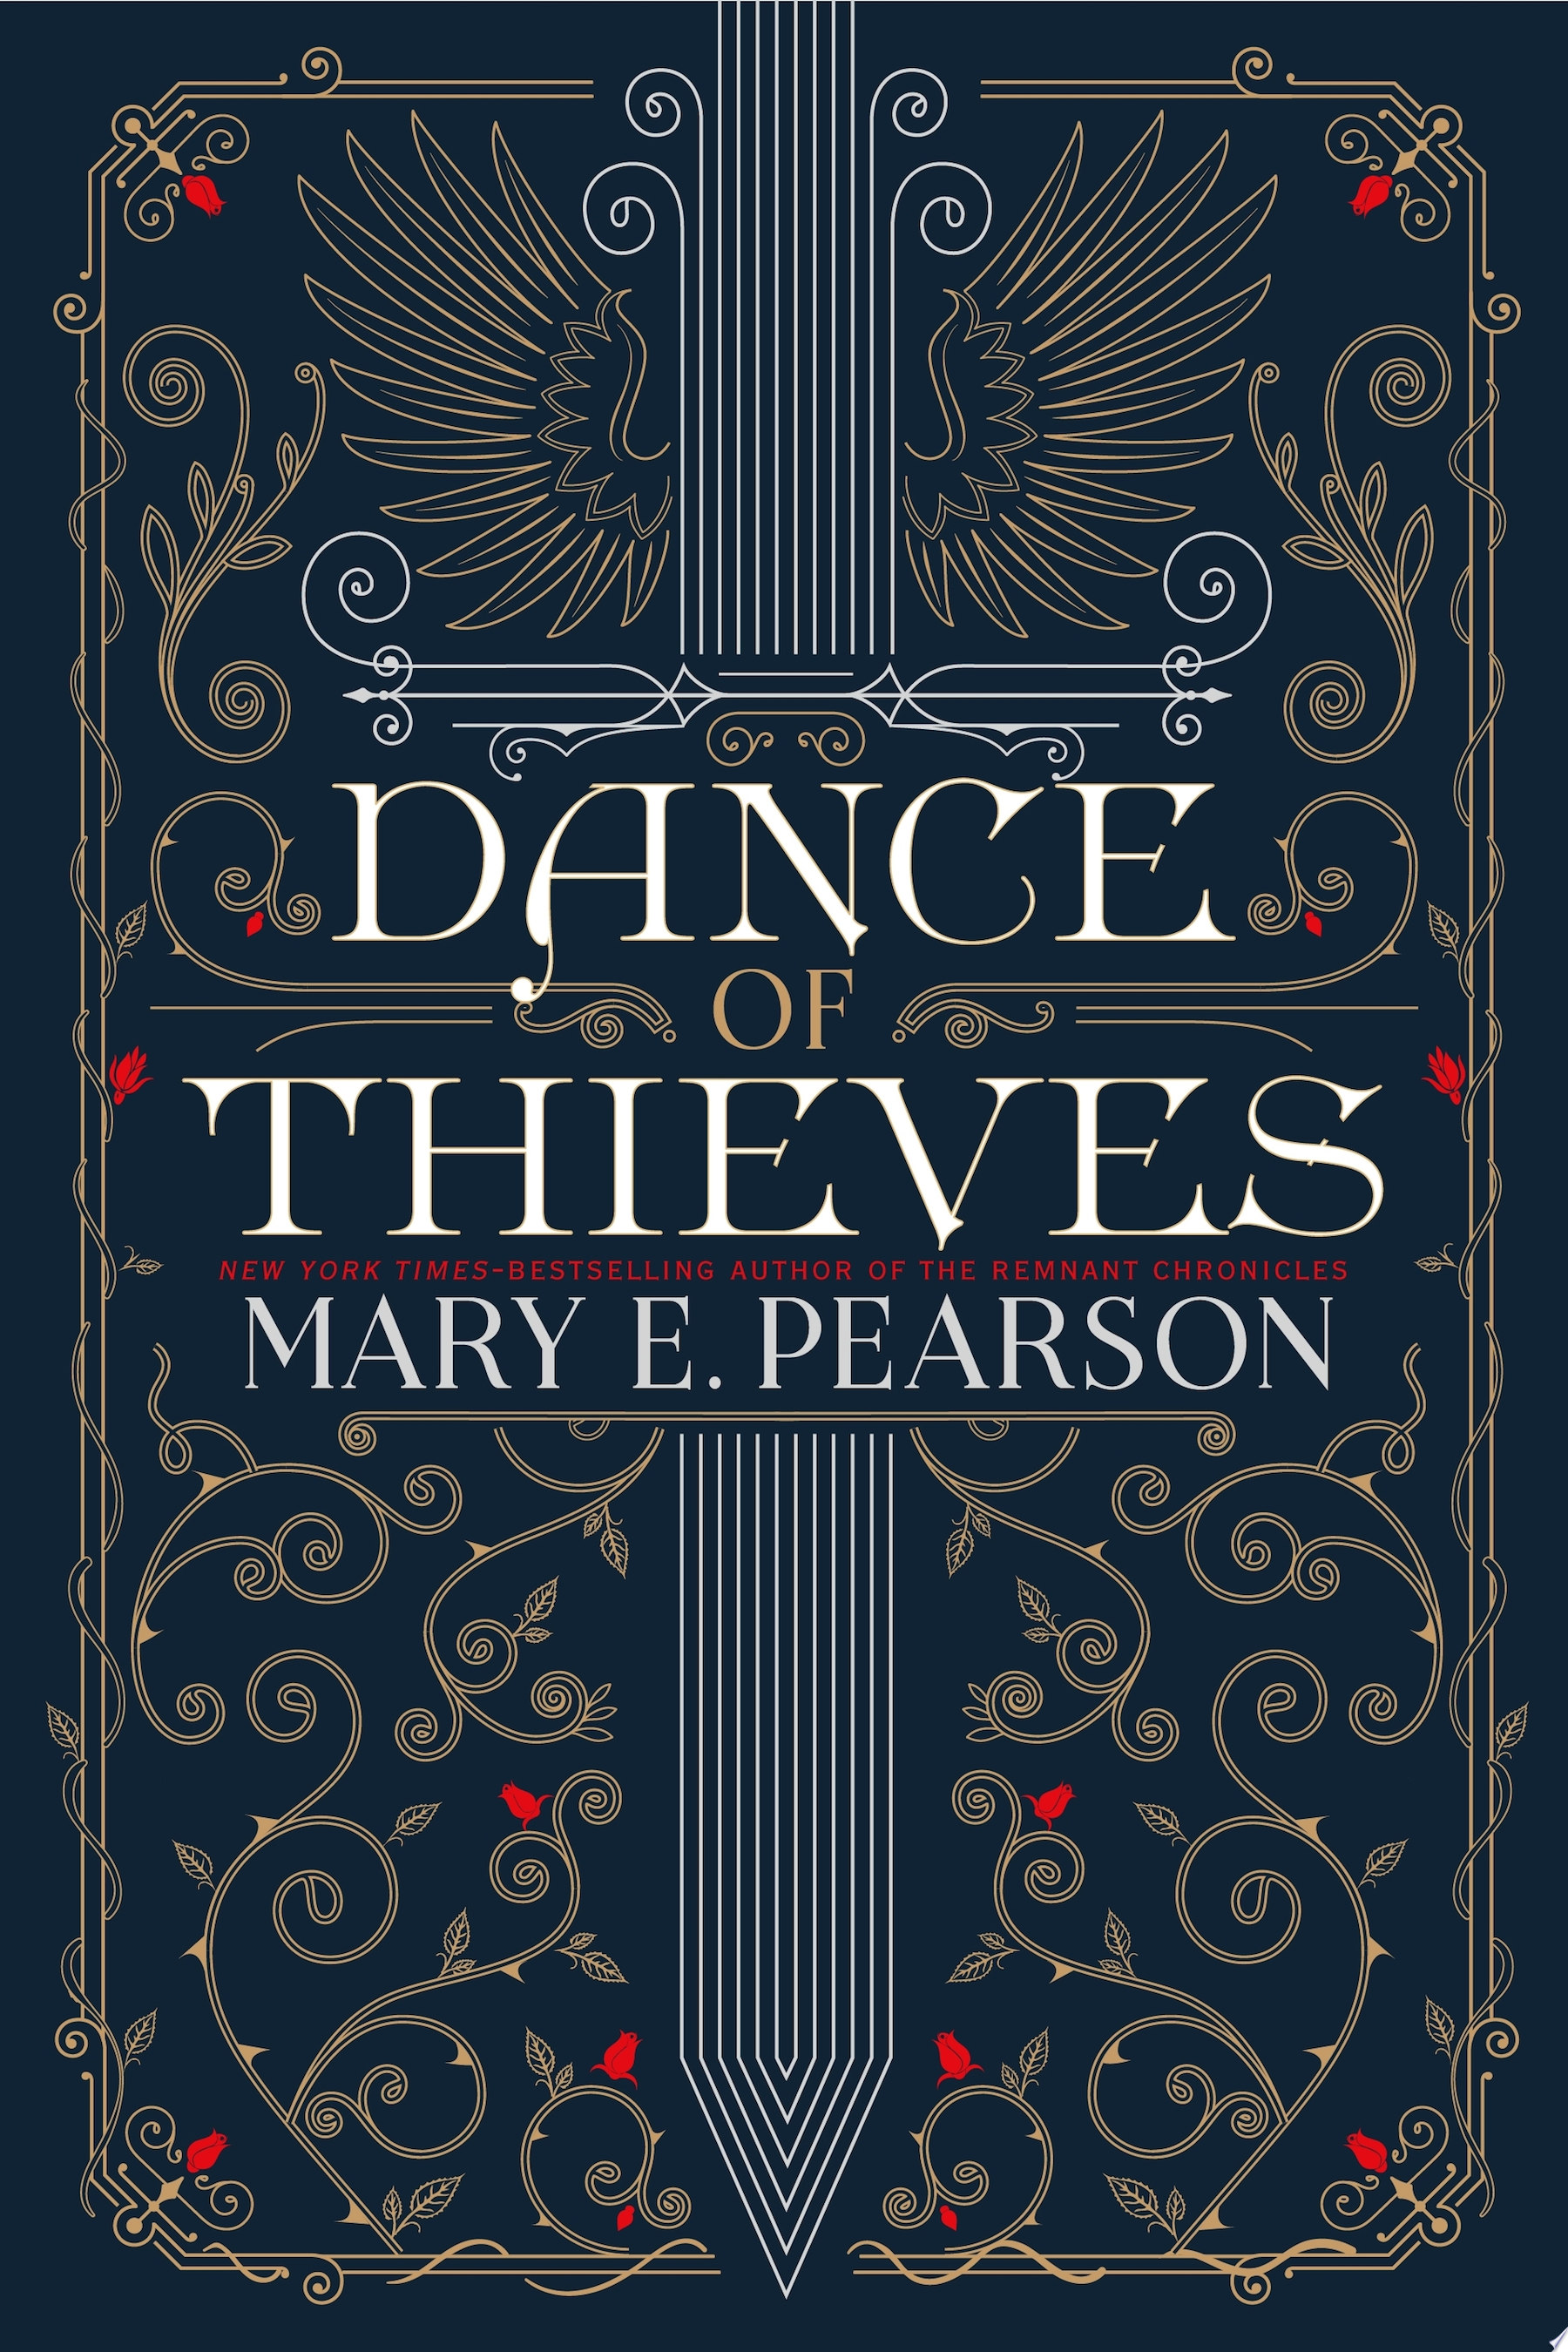 Image for "Dance of Thieves"